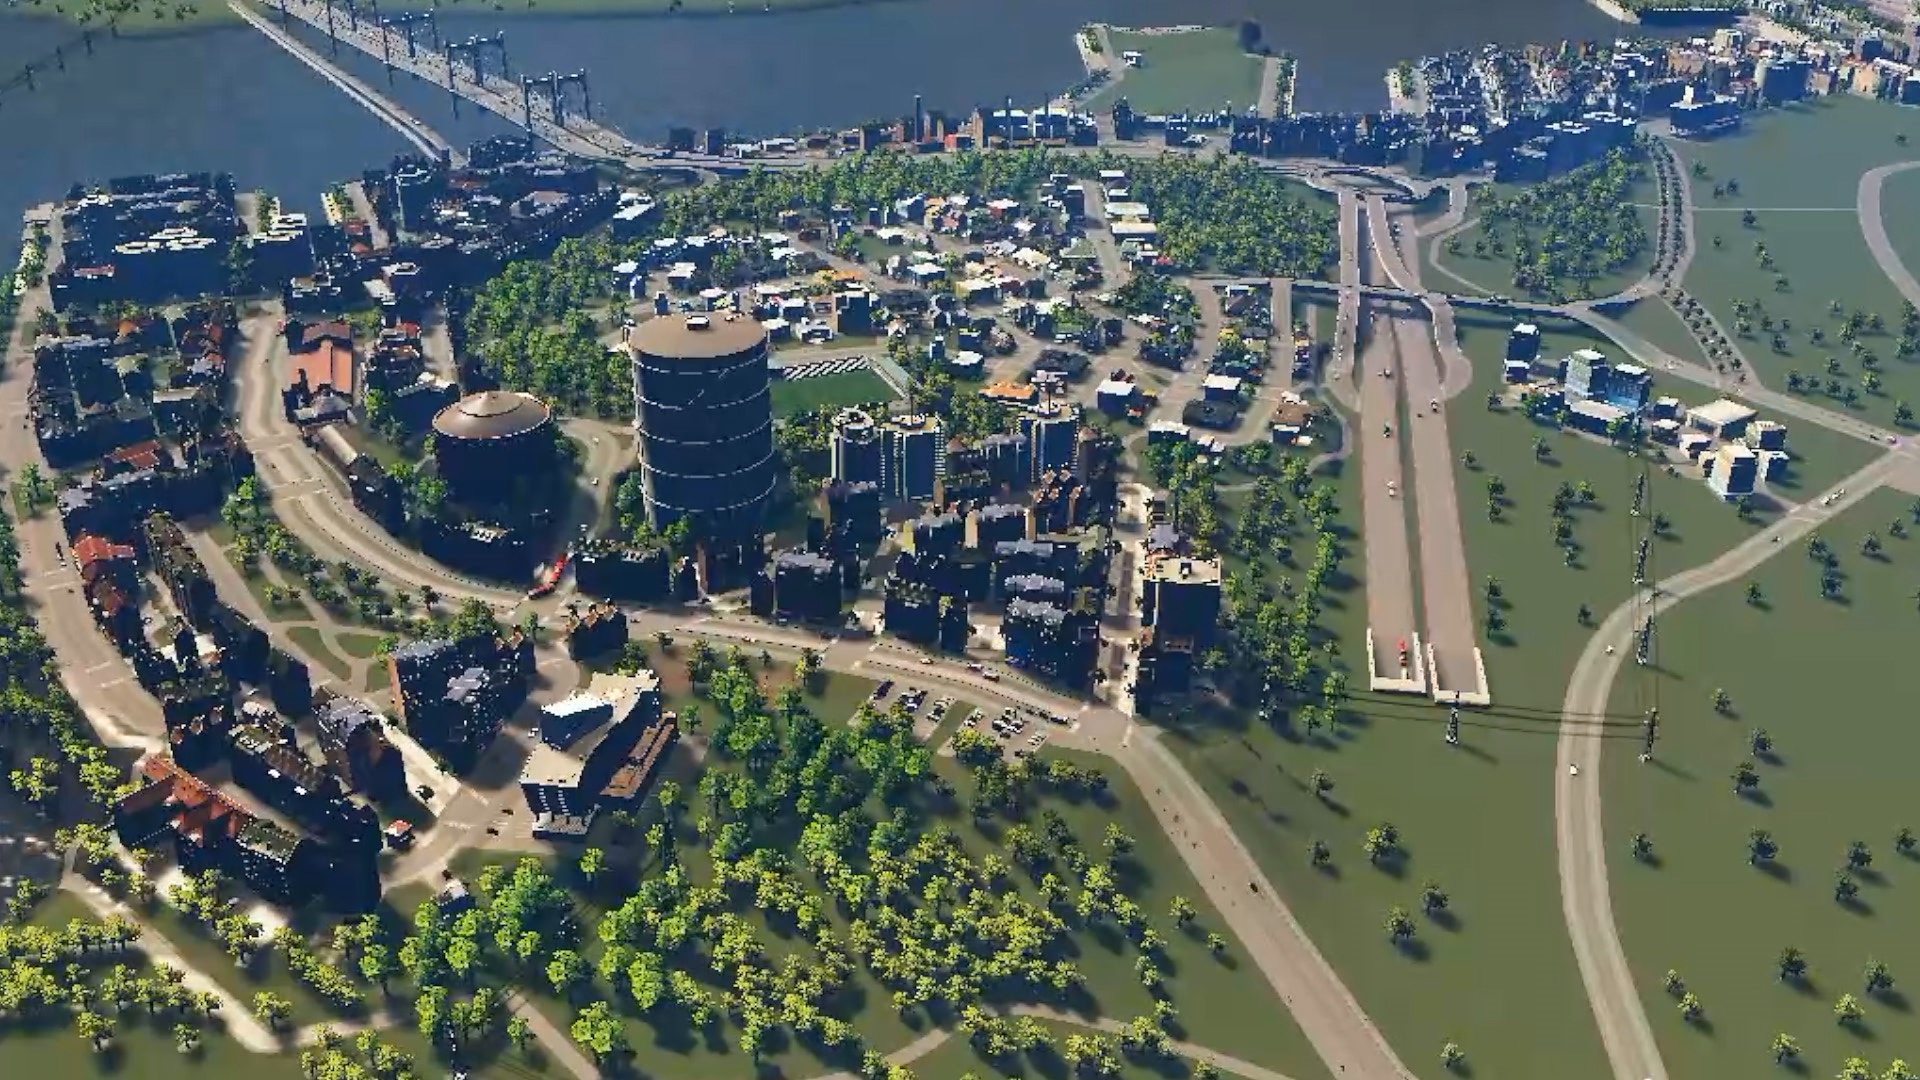 cities skylines mods not showing